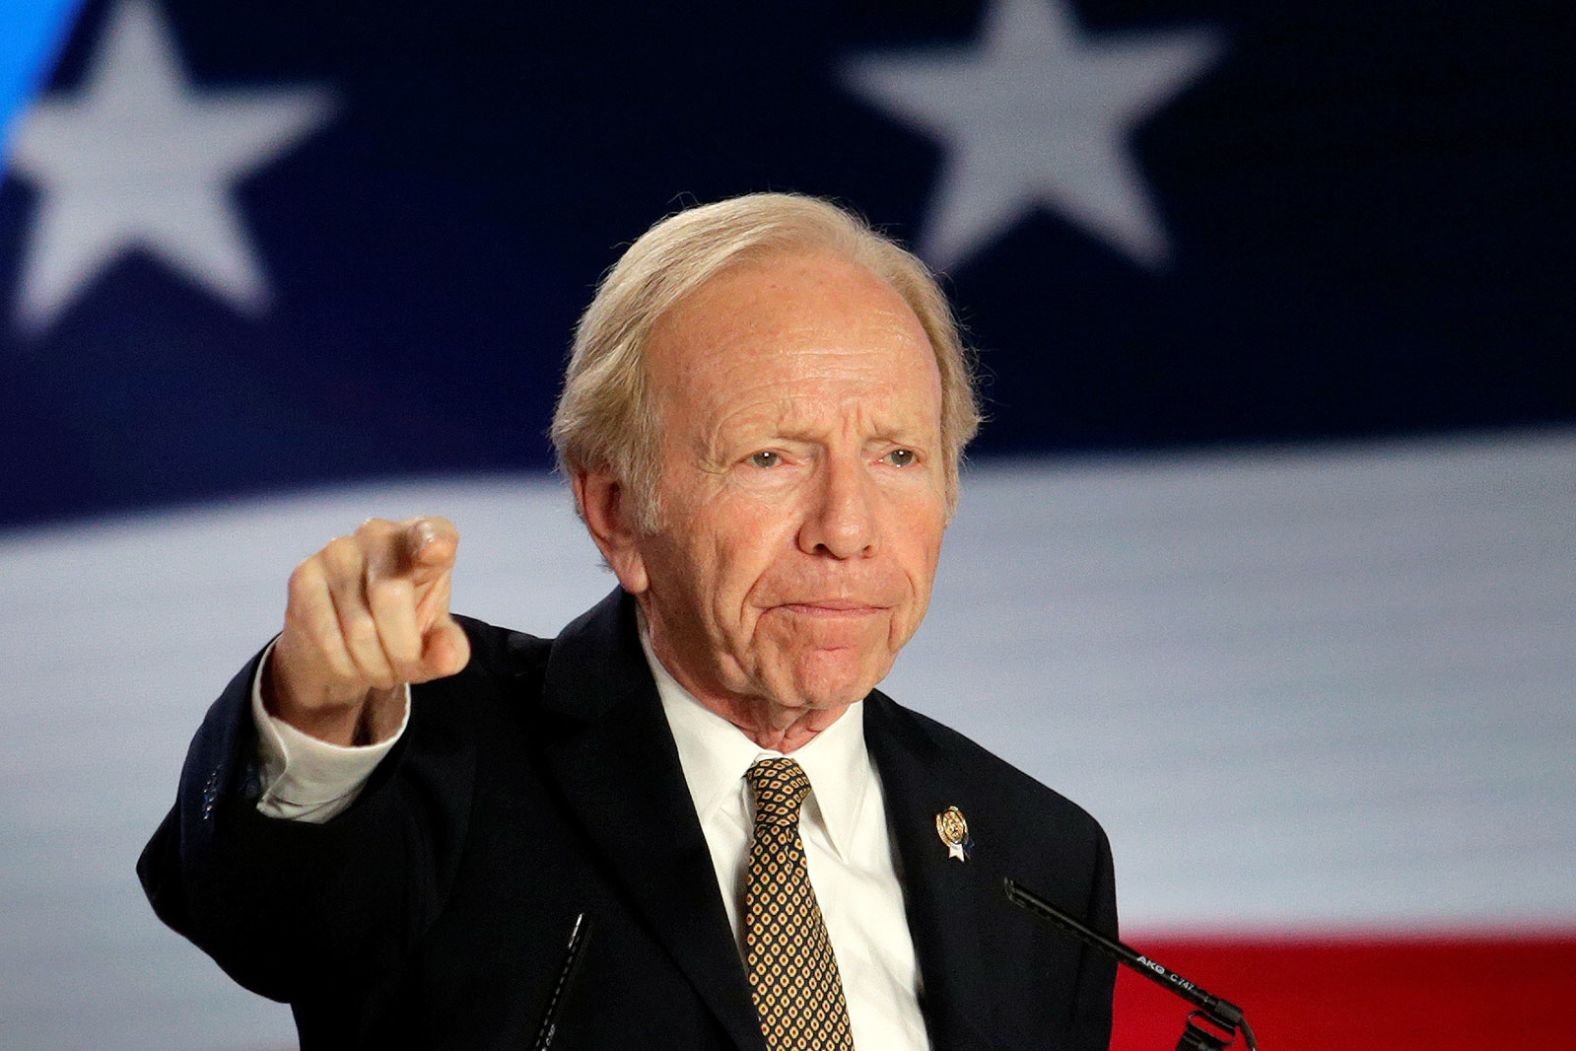 <a href="index.php?page=&url=https%3A%2F%2Fwww.cnn.com%2F2024%2F03%2F27%2Fpolitics%2Fjoe-lieberman%2Findex.html" target="_blank">Joe Lieberman</a>, the first Jewish vice-presidential nominee of a major party, whose conscience and independent streak later led him on a journey away from his home in the Democratic Party, died on March 27, according to a statement from his family. He was 82.